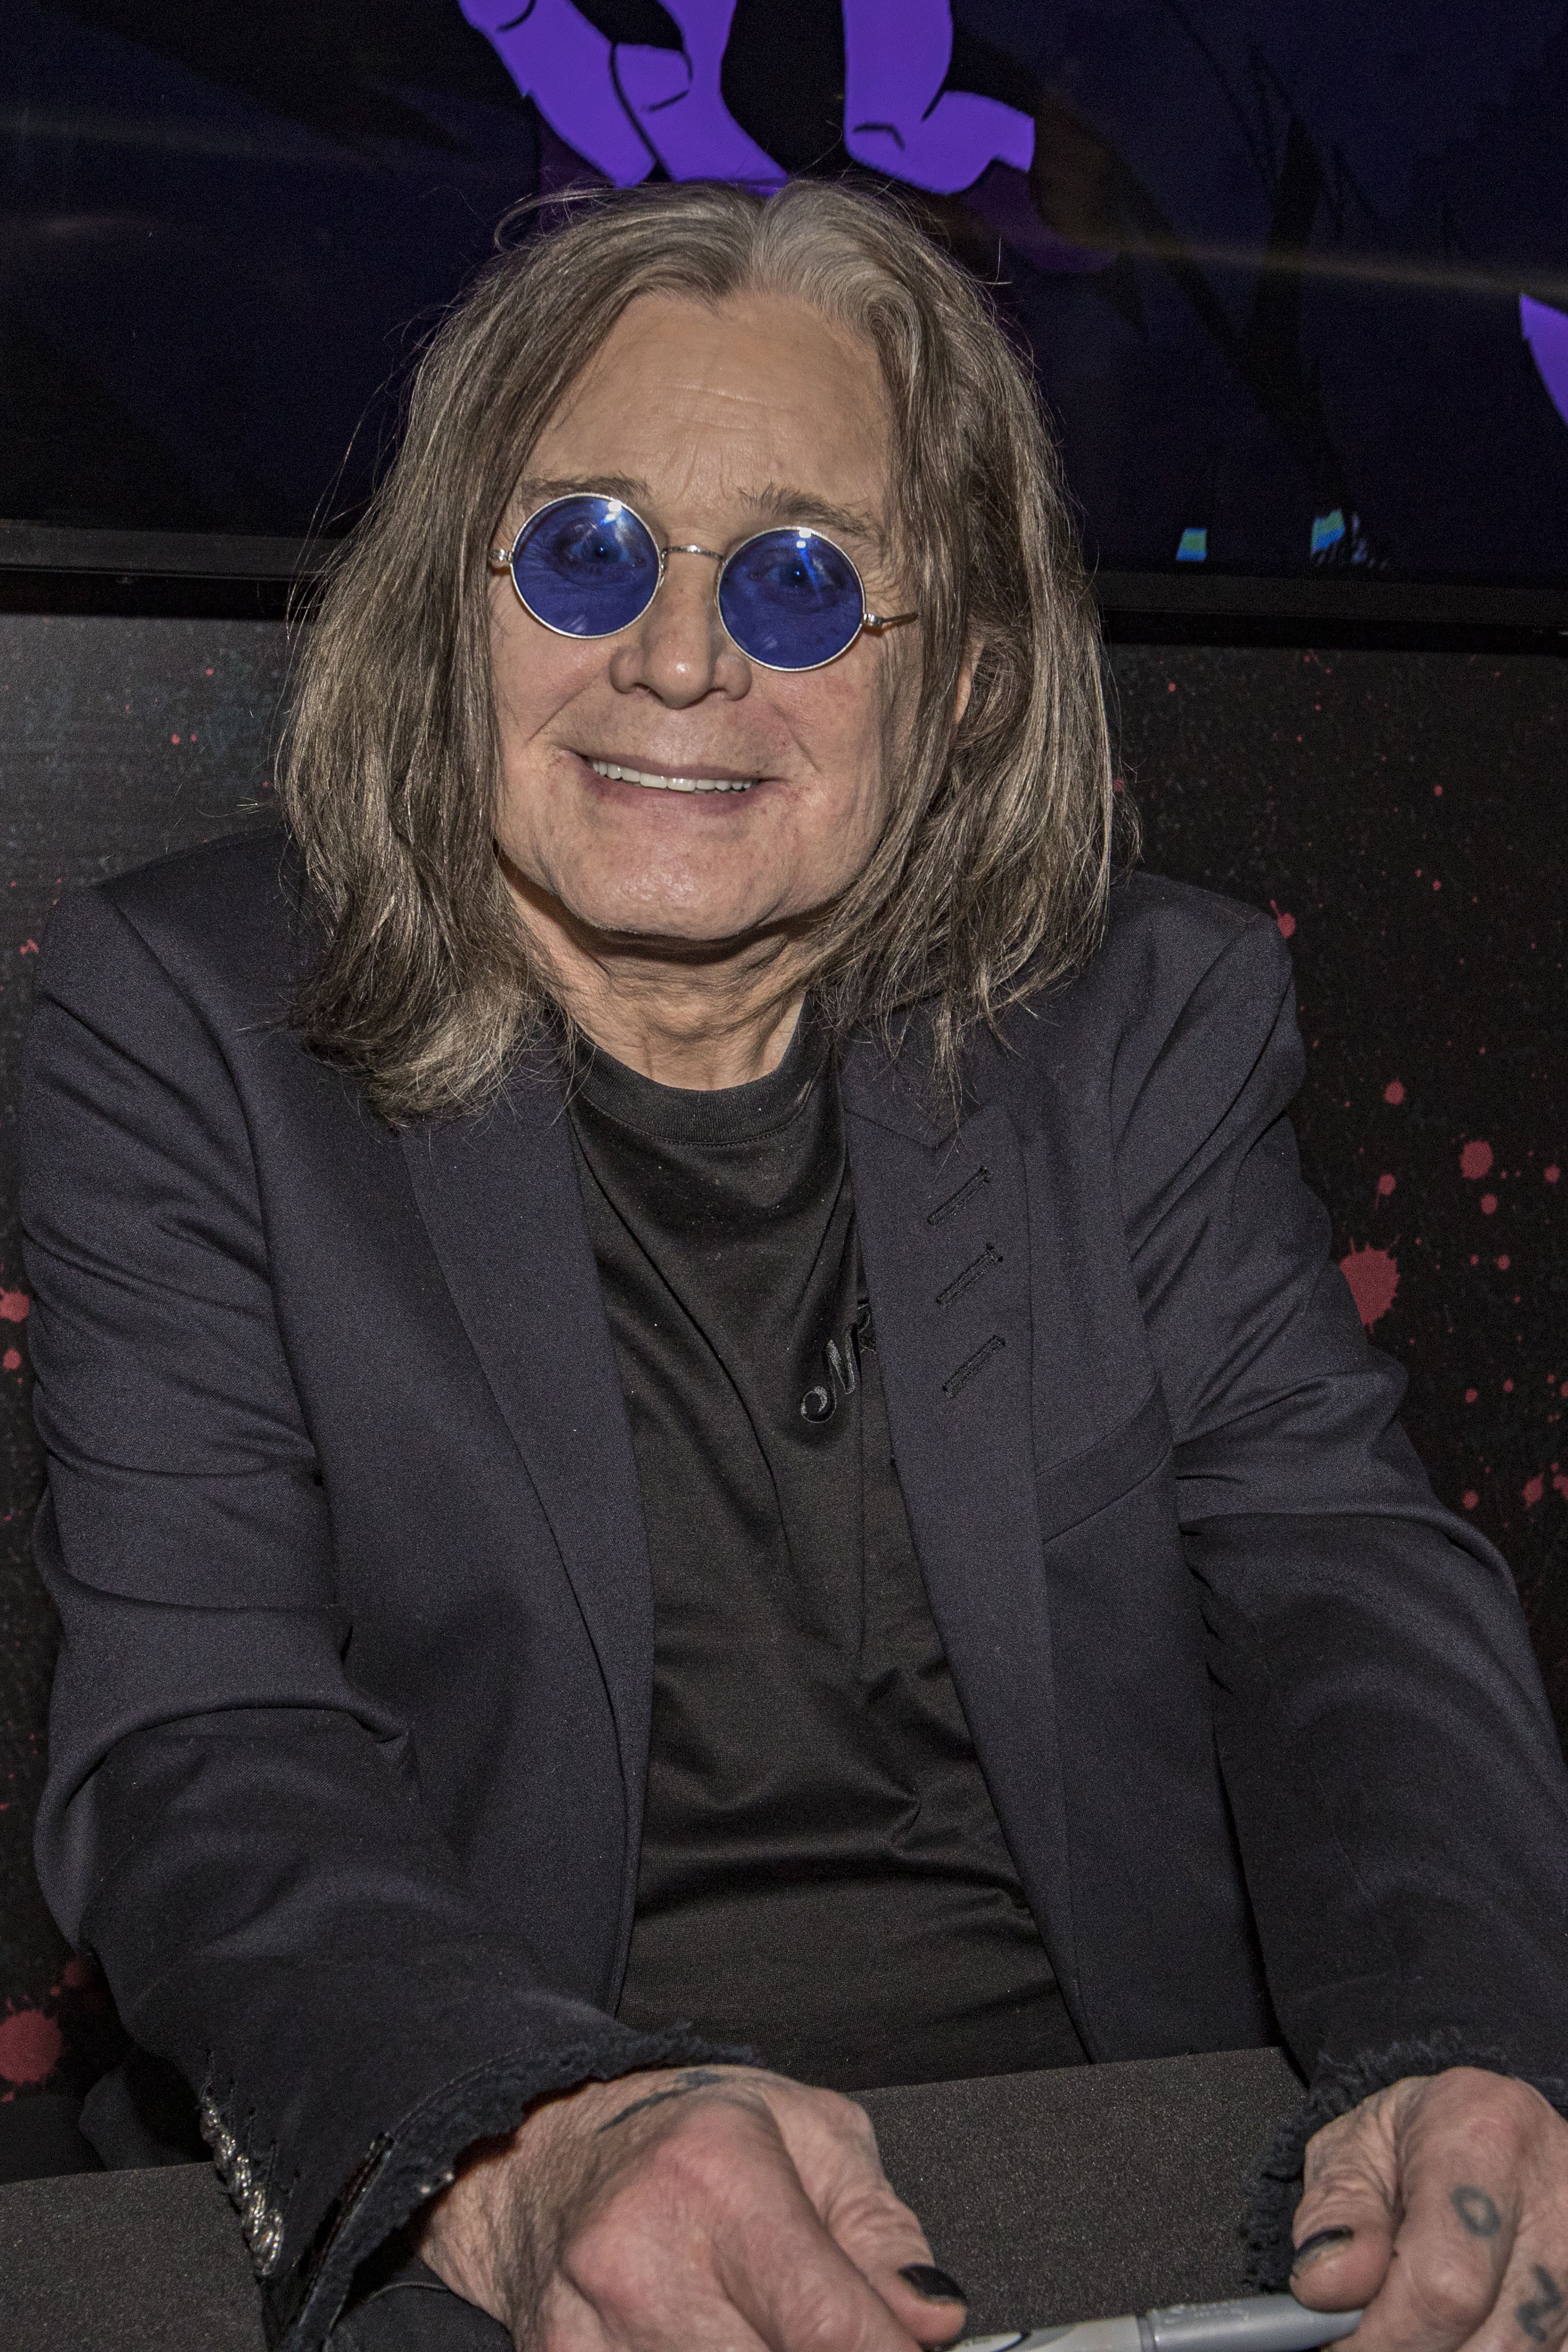 Ozzy Osbourne during Comic-Con International Day 2 on July 22, 2022, in San Diego, California | Source: Getty Images